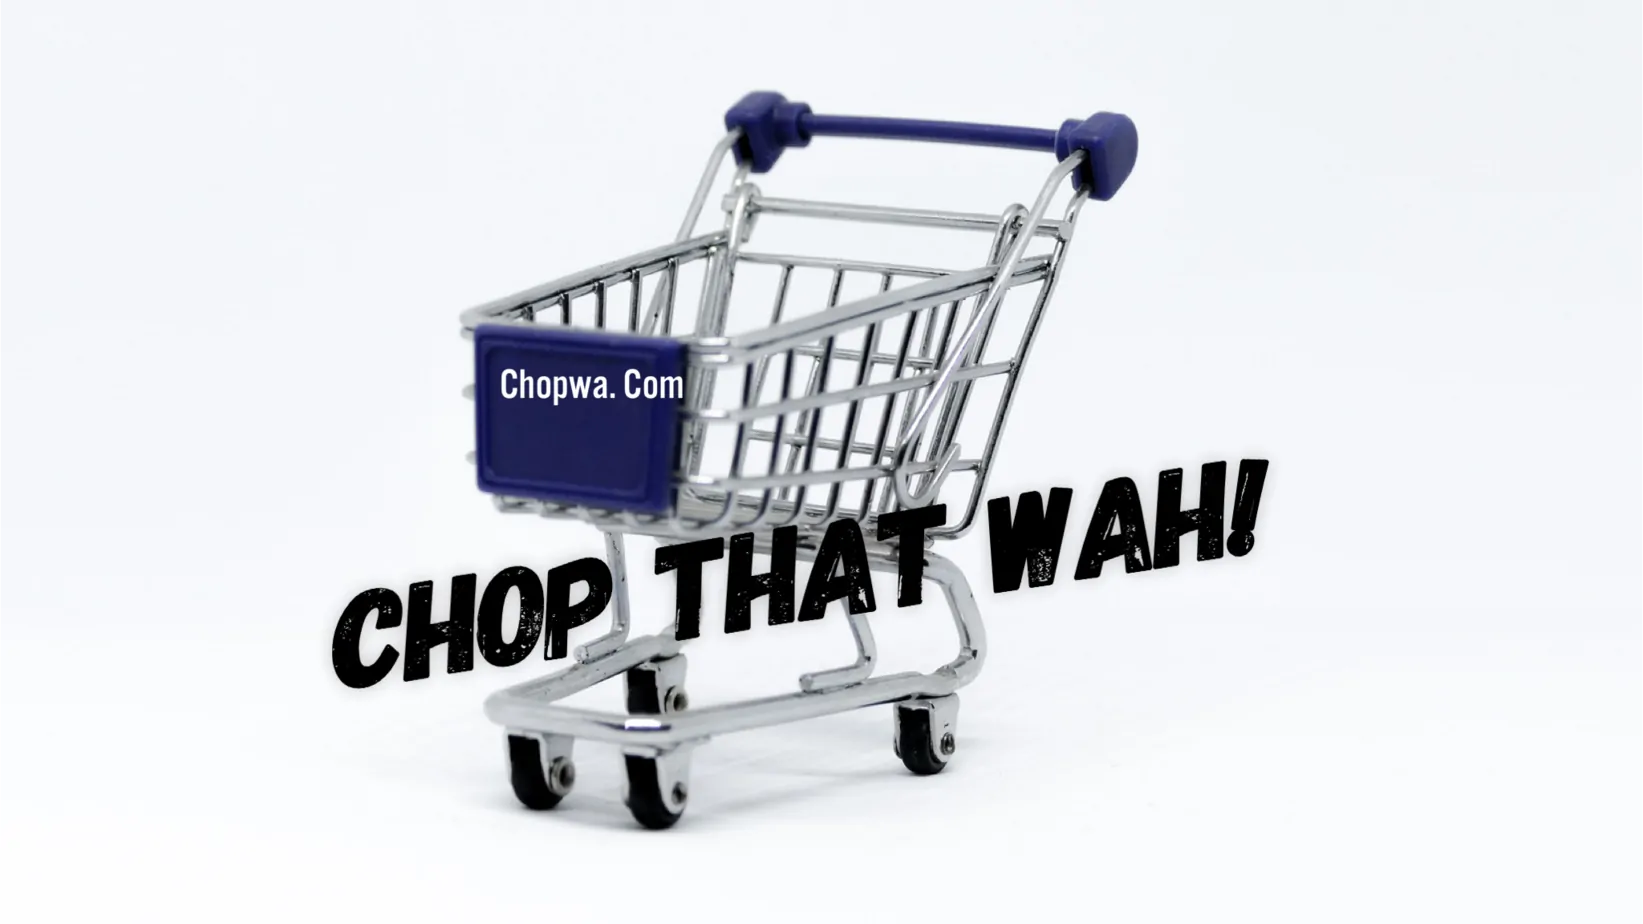 Chopwa, chop the wah. An online shop with reviews of all kind, references to some interesting products and services.